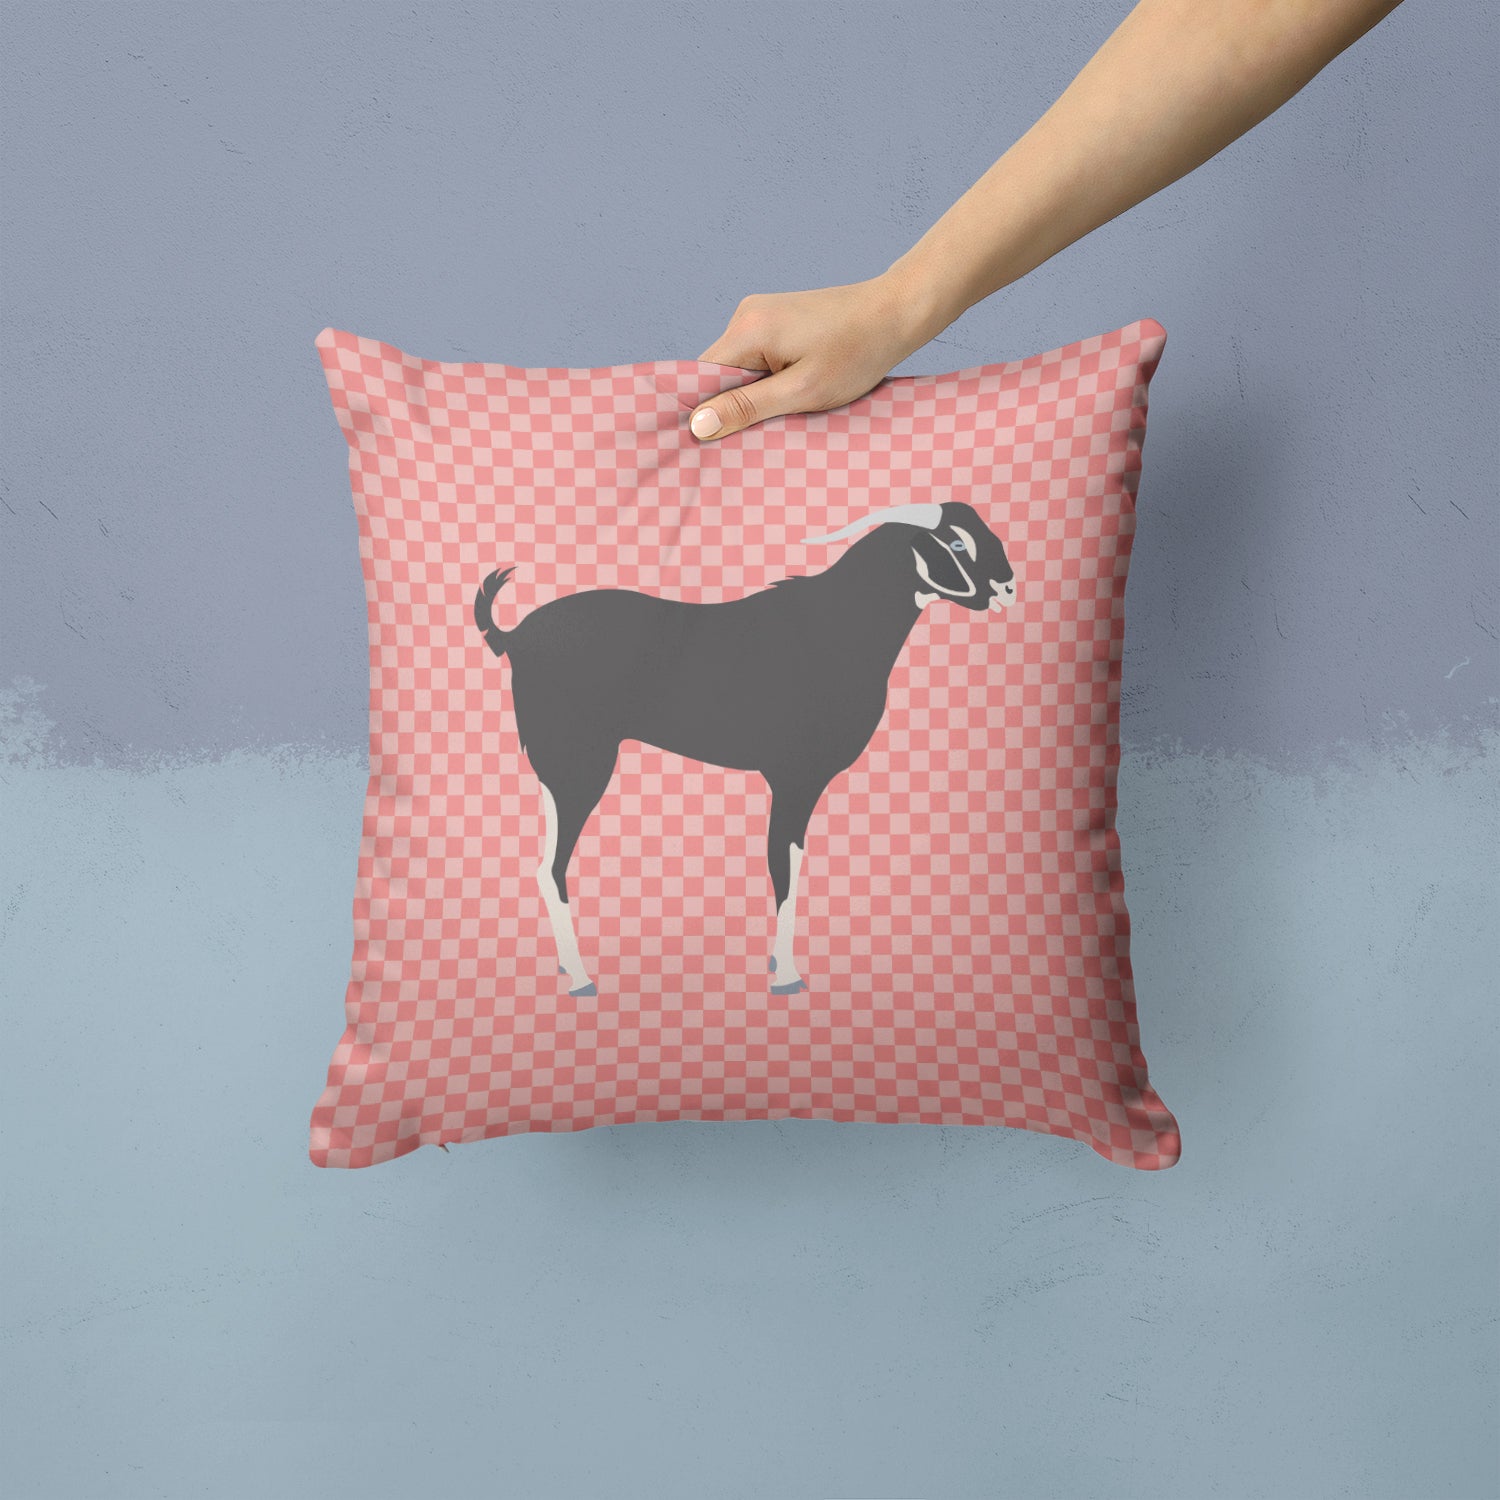 Black Bengal Goat Pink Check Fabric Decorative Pillow BB7884PW1414 - the-store.com